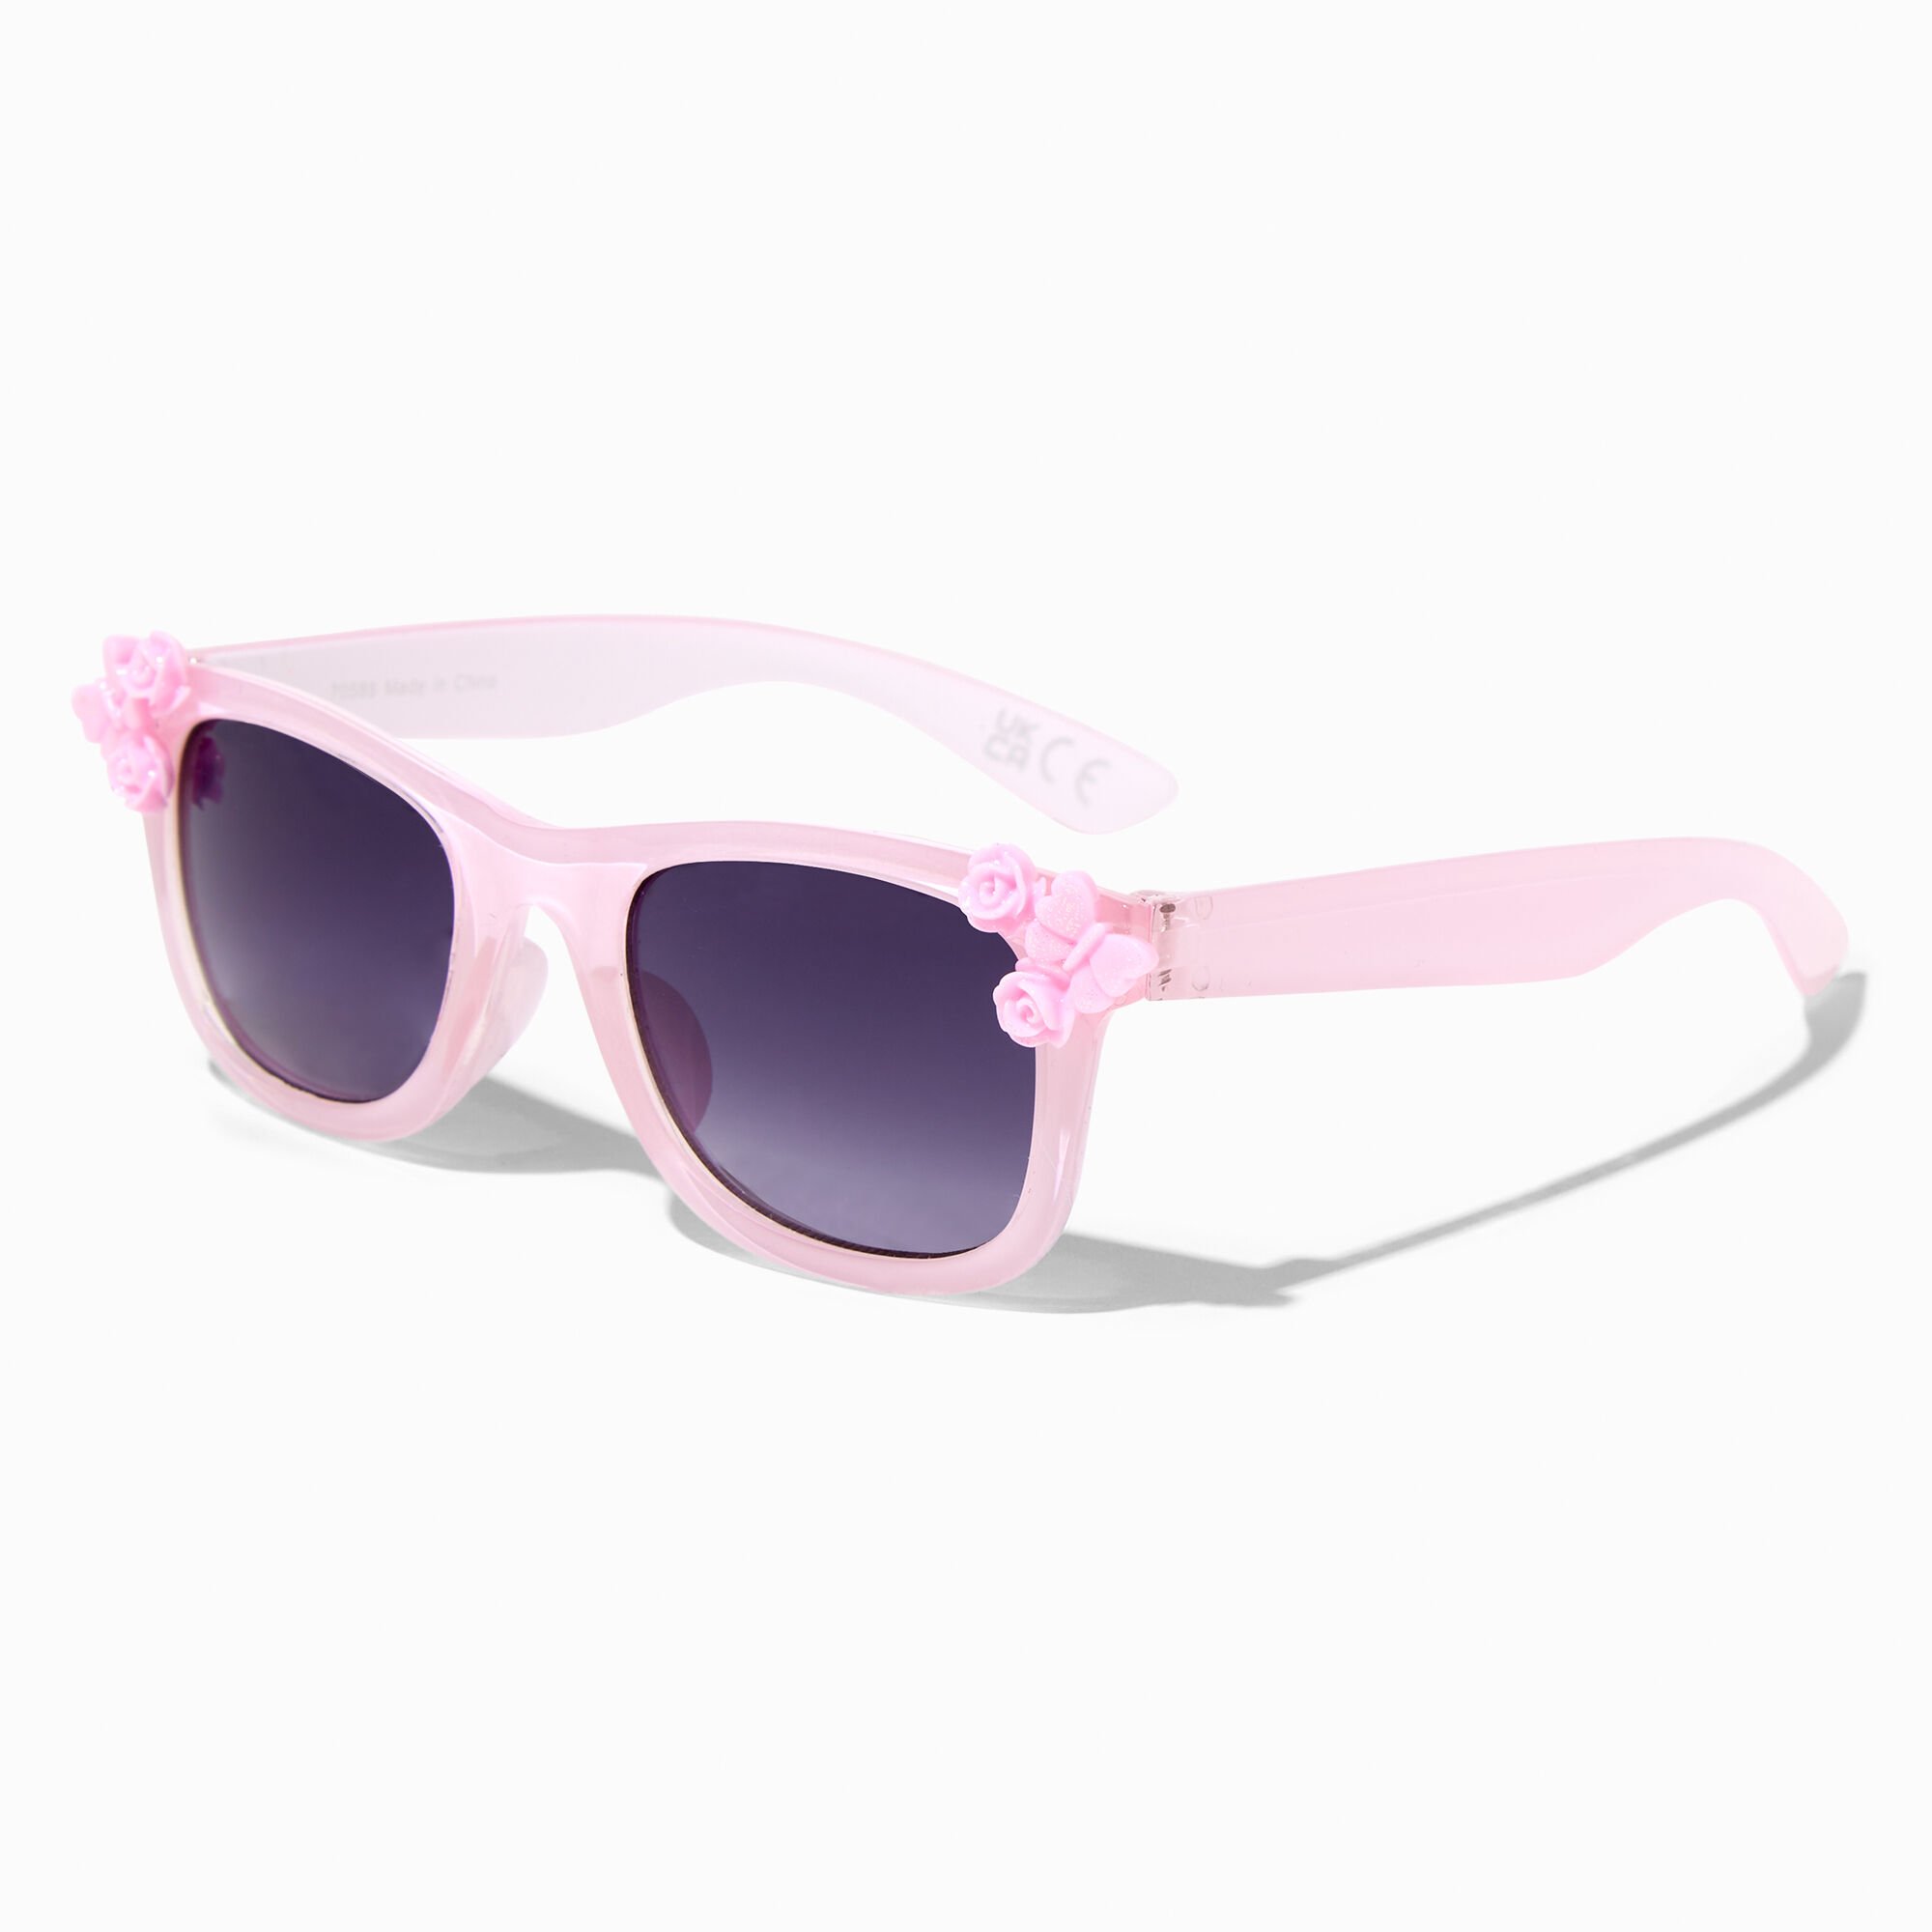 View Claires Club Floral Butterfly Retro Sunglasses Pink information